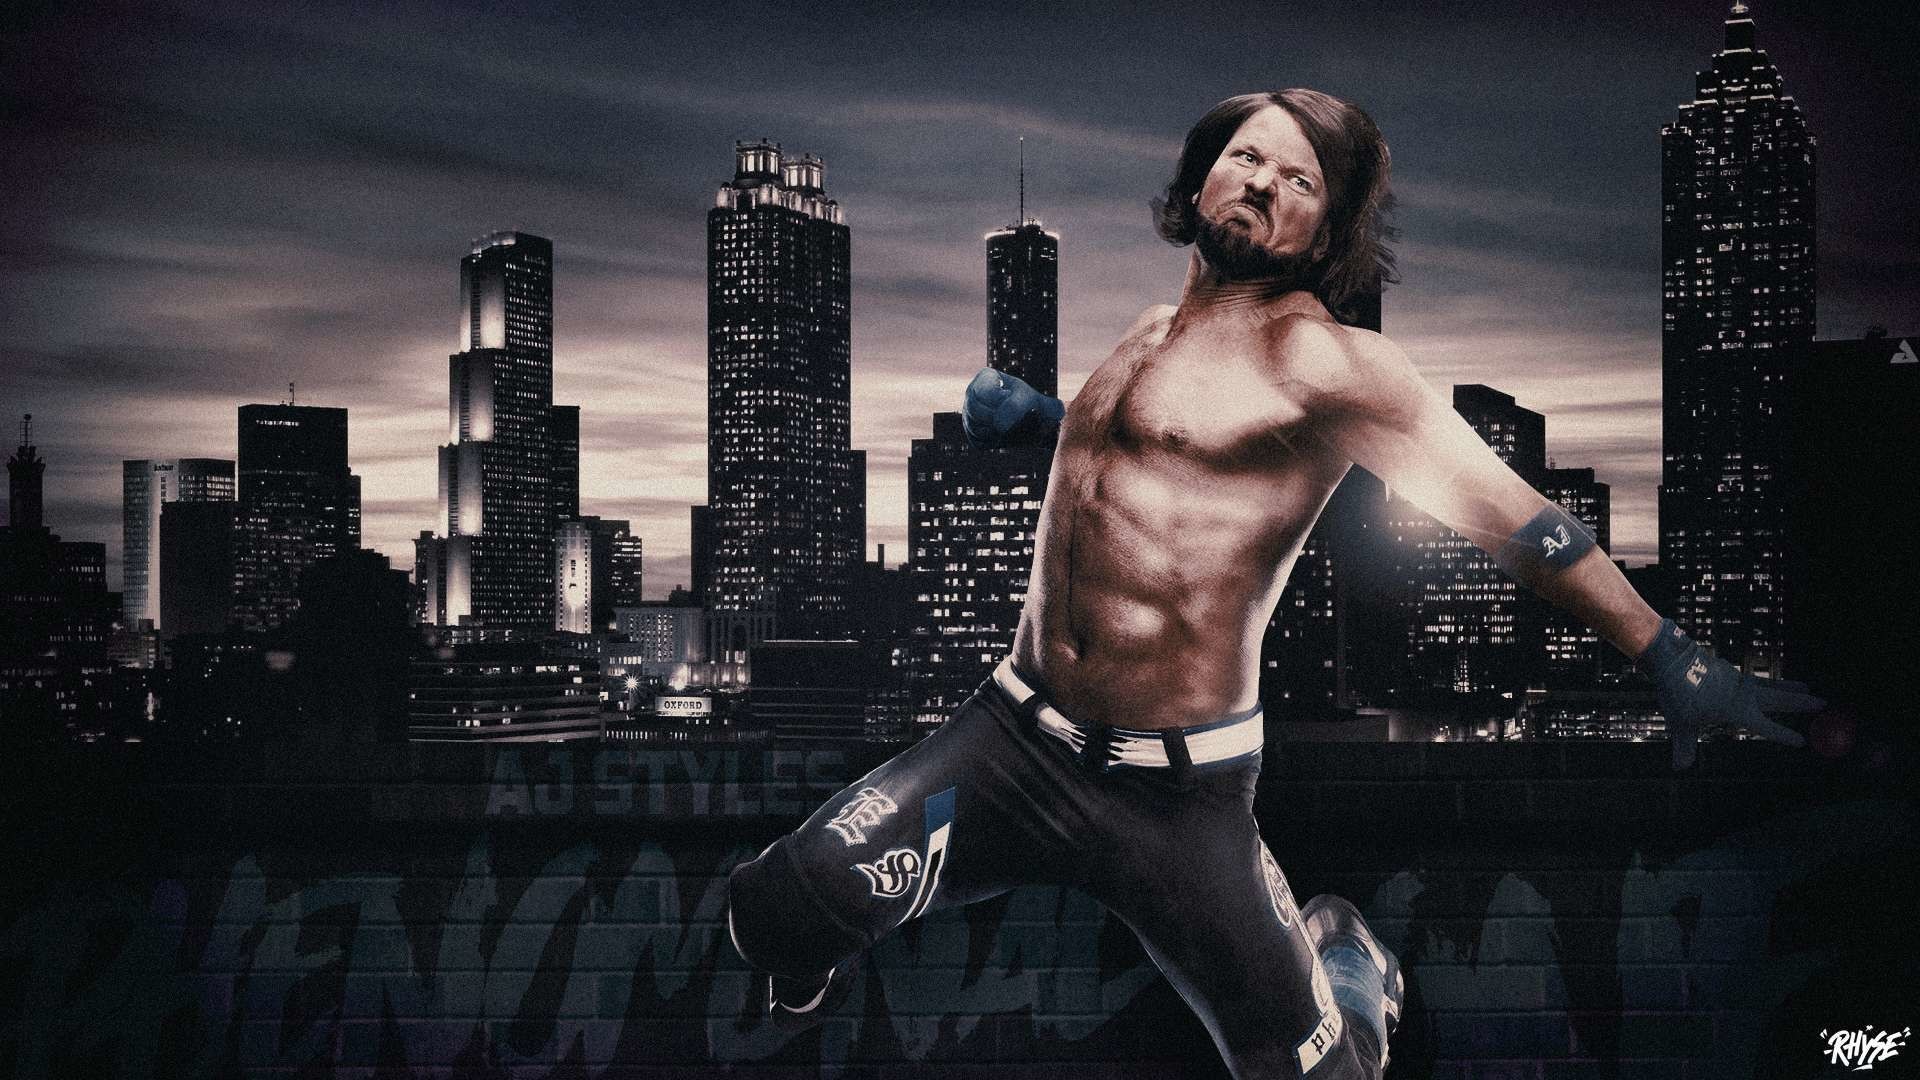 Ajstyles Memes and Images - Imgur